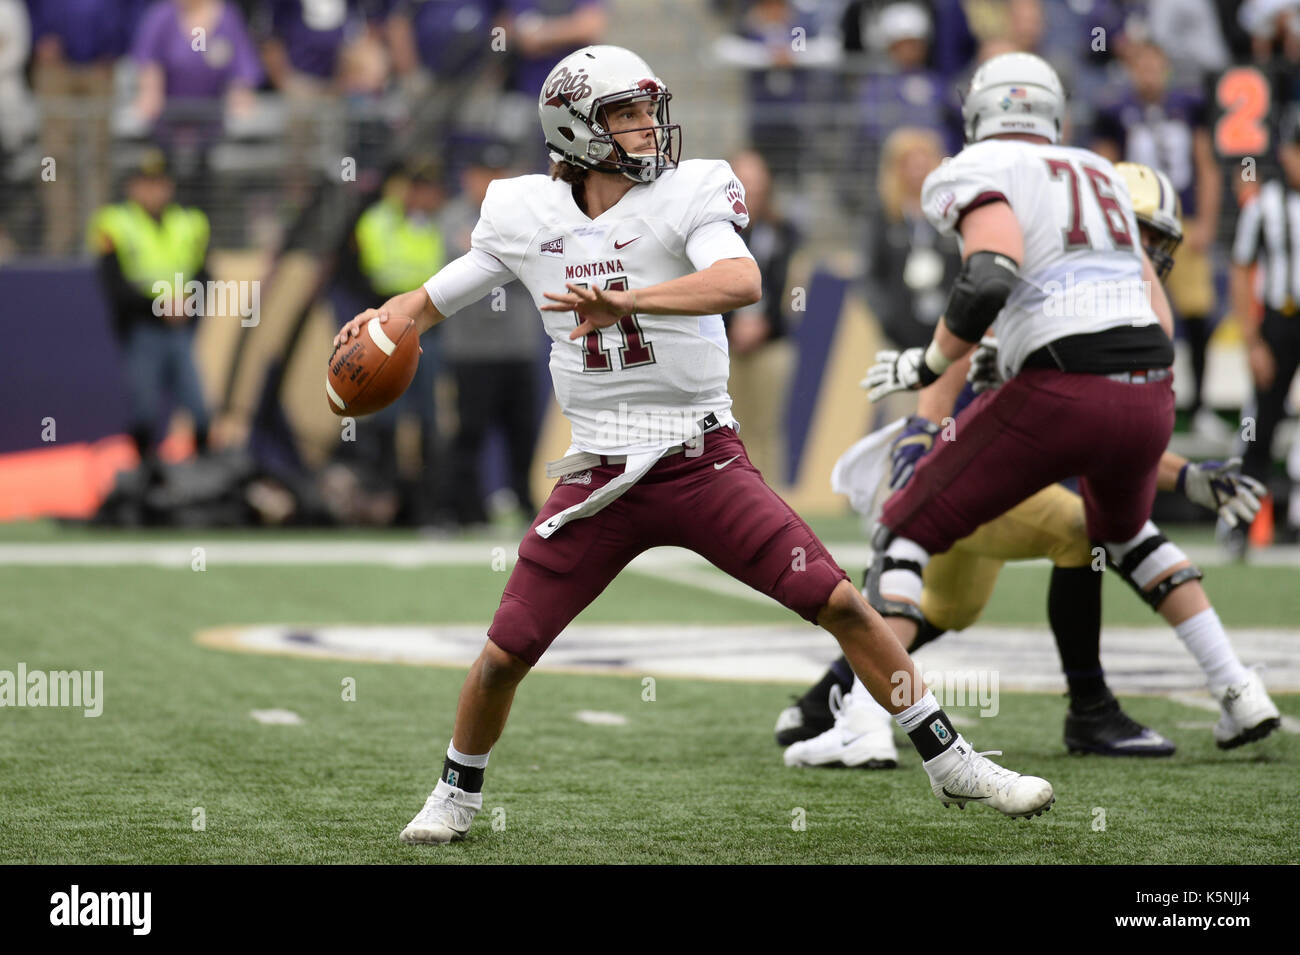 Seattle, WA, USA. 9th Sep, 2017. Montana quarterback Reese Phillips (11) in action during a game between the Montana Grizzlies and the Washington Huskies in Seattle, WA. Jeff Halstead/CSM/Alamy Live News Stock Photo